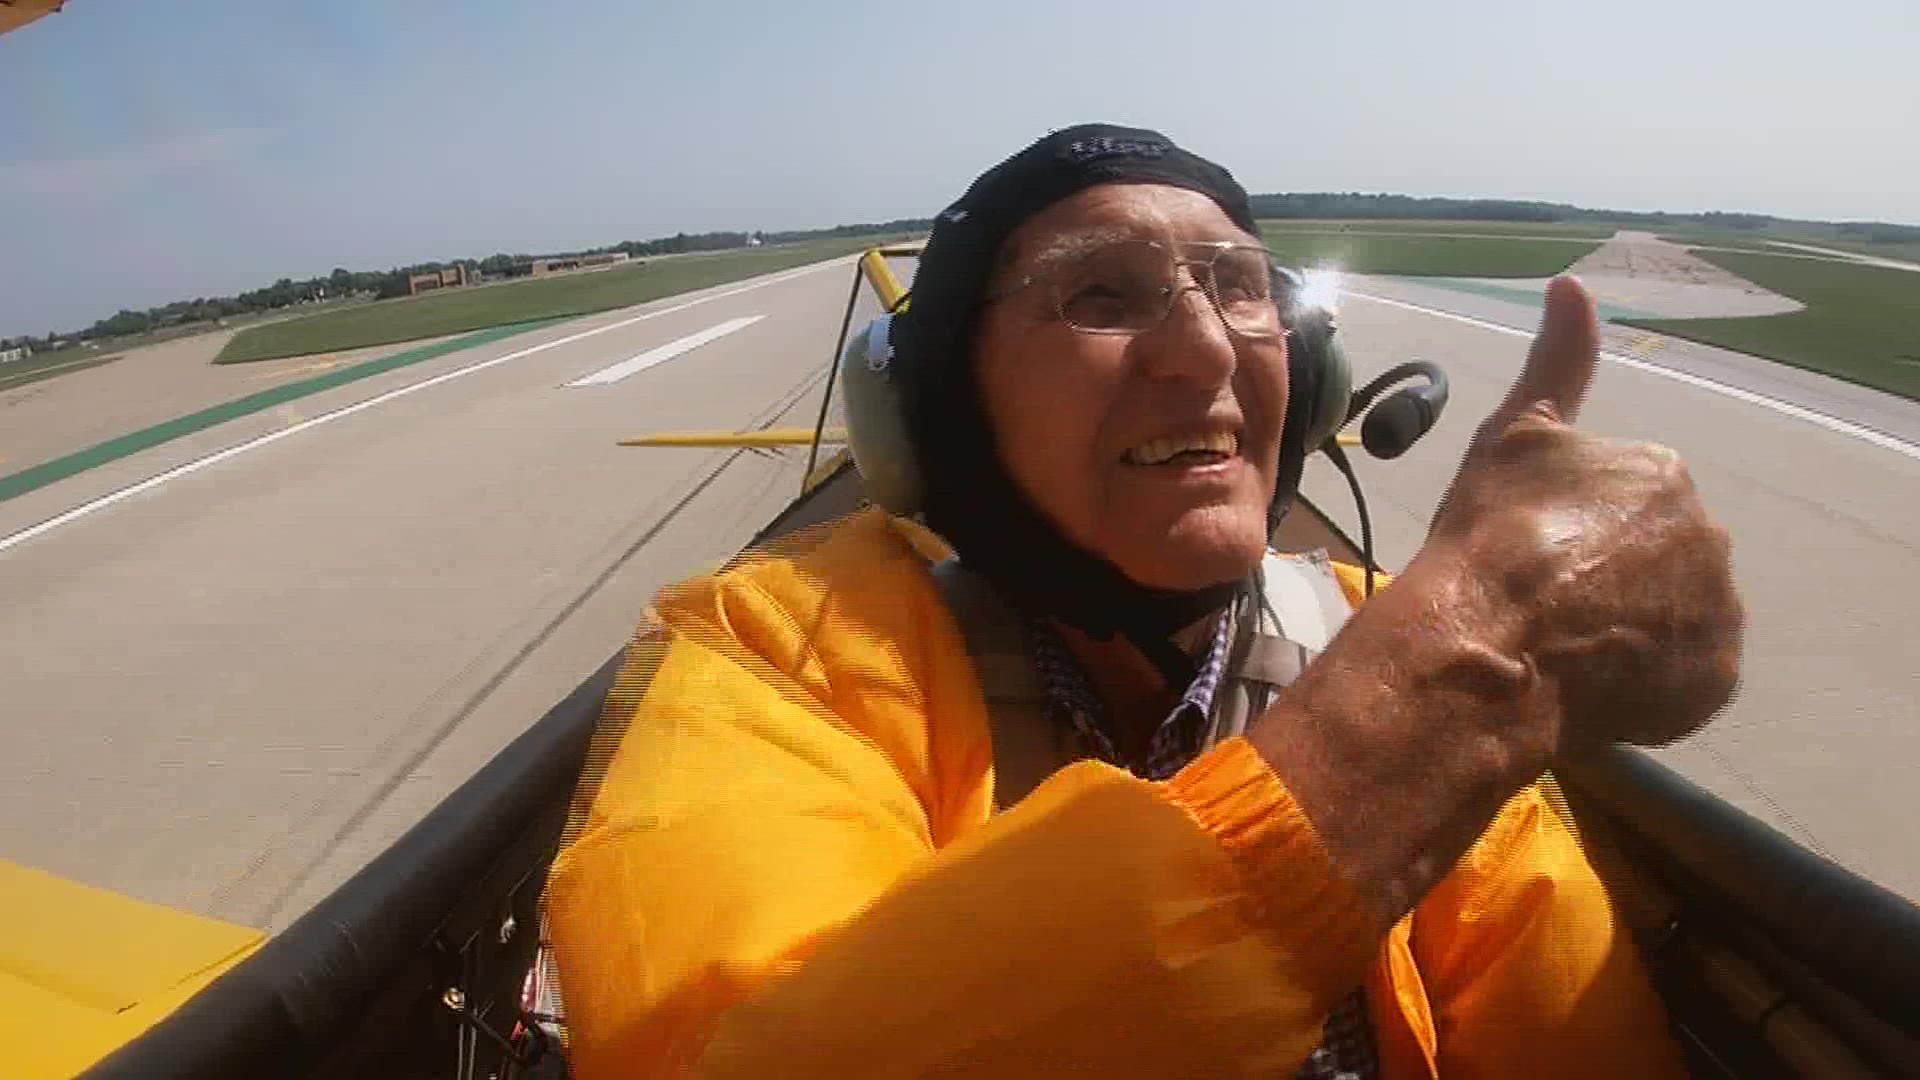 Dream Flights is a non-profit organization created to give seniors and military veterans the chance to fly in the cockpit of a World War II era Stearman plane.